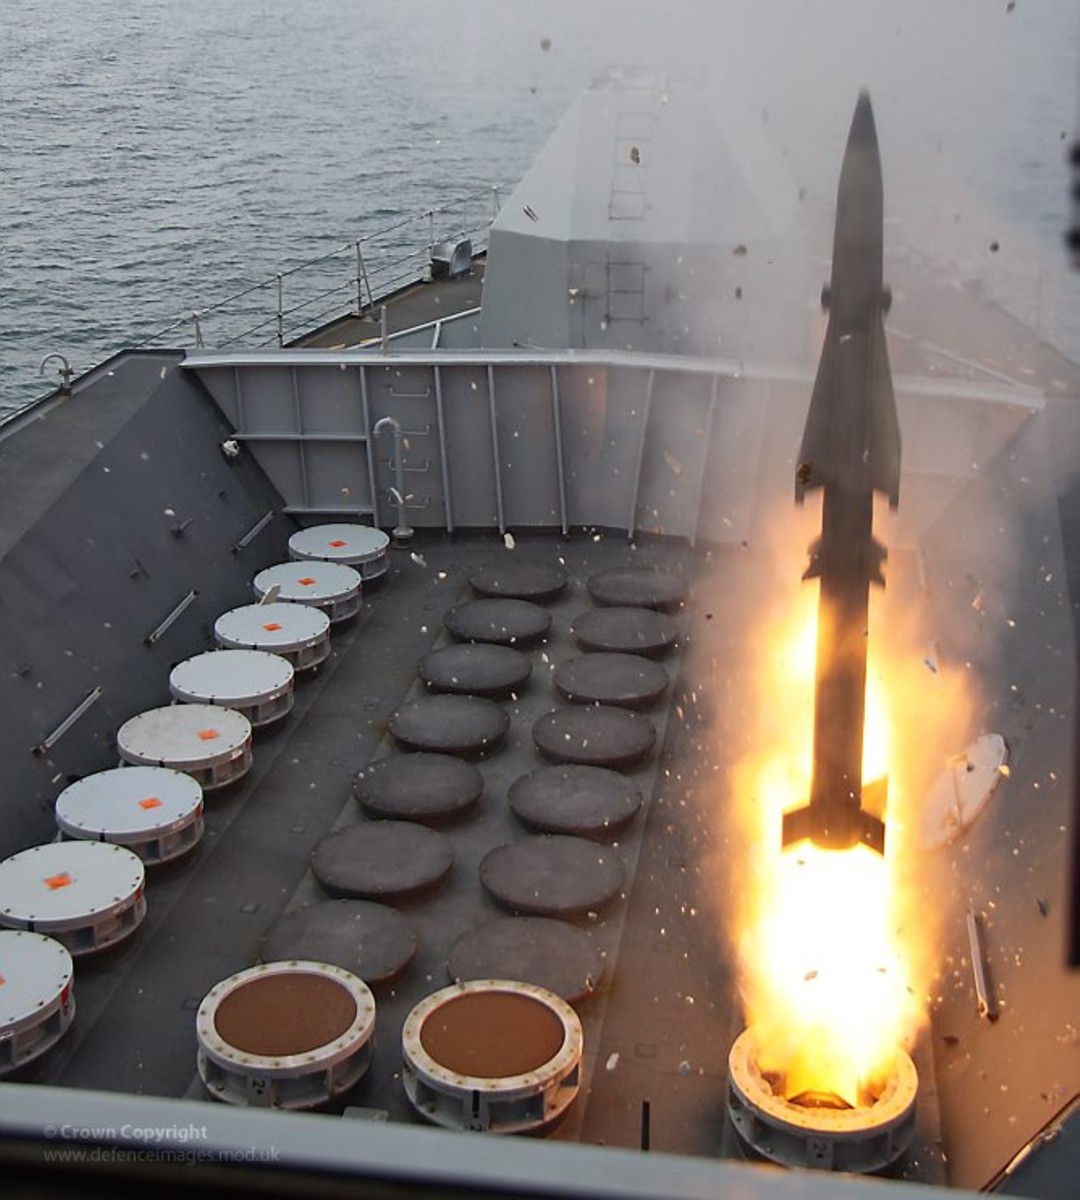 sea wolf sam missile gws-26 guided weapon system vertical launch type 23 duke class frigate royal navy 07 booster